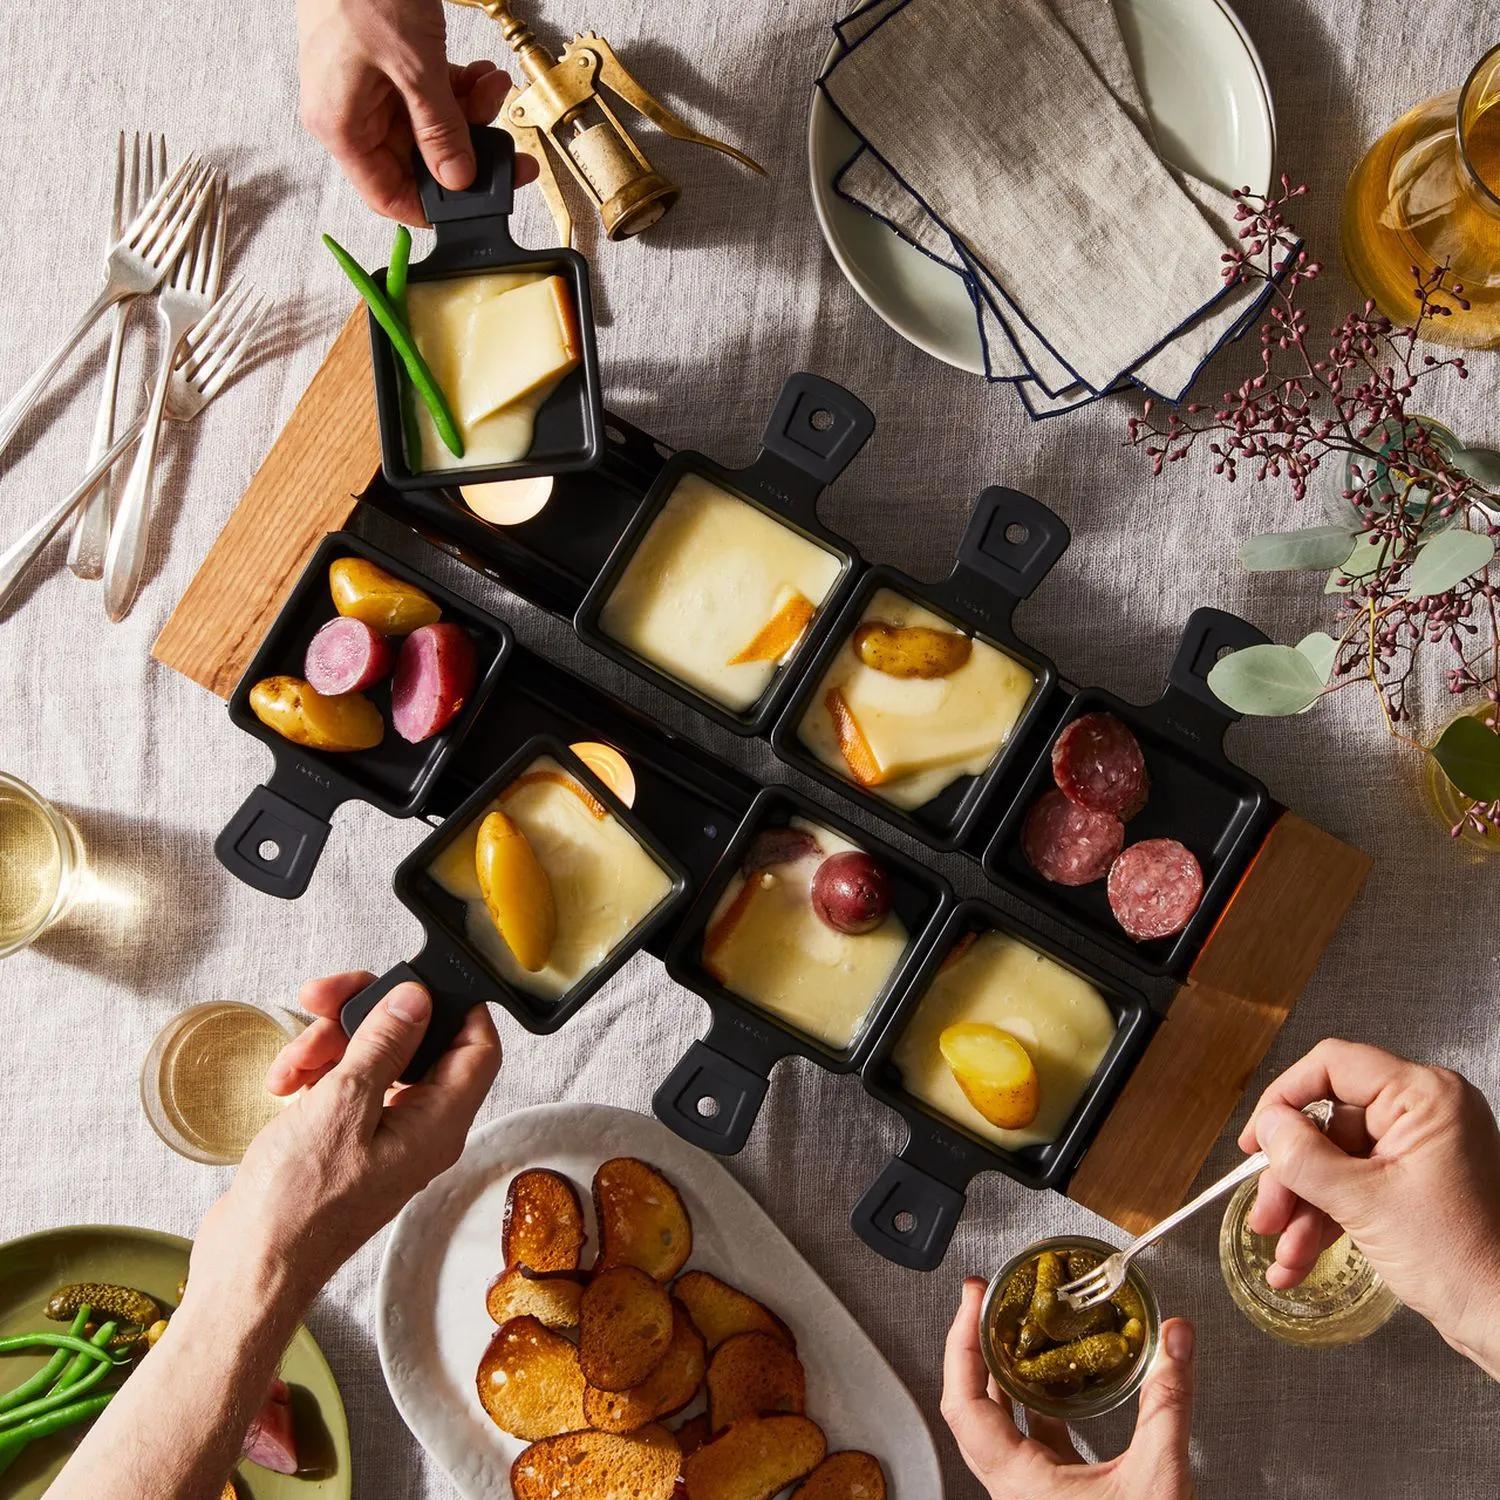 Boska Raclette Set for Cheese Melting, 8 Individual Pans, Scrapers ...